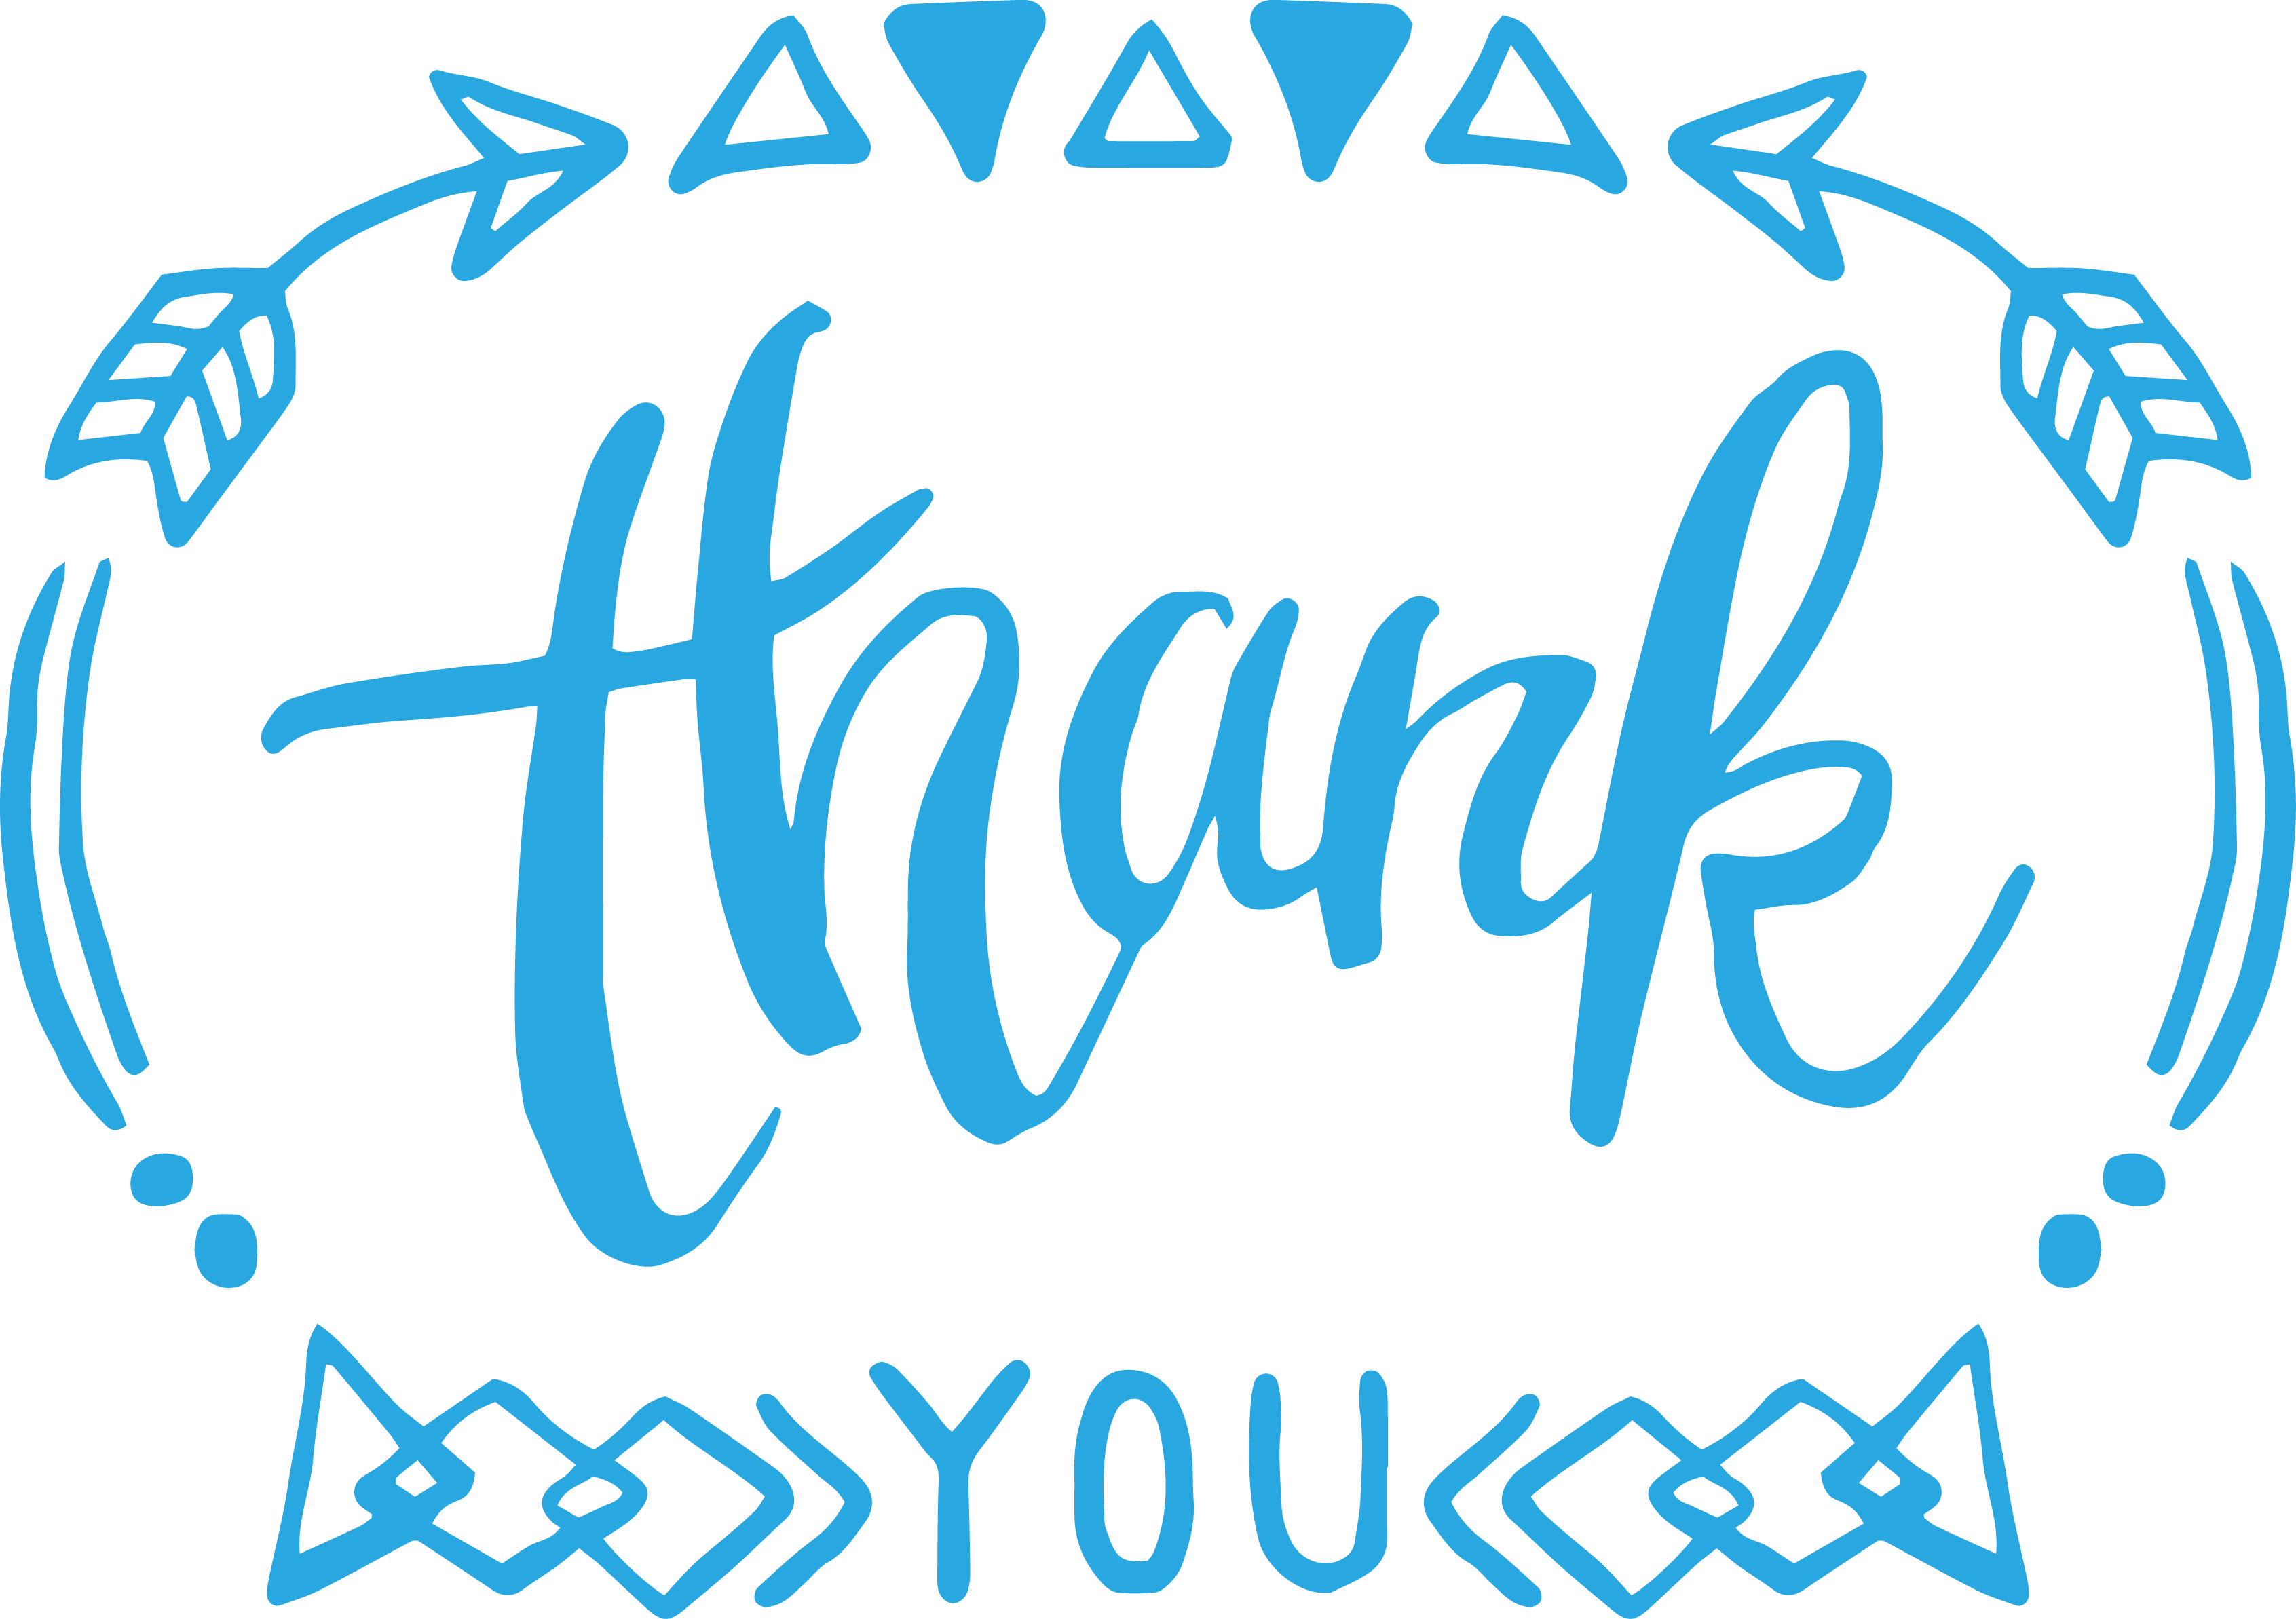 Sky Blue Geometric Border Thank You Png Download 3383 2386 Free Transparent Download Png Download Clip Art Library